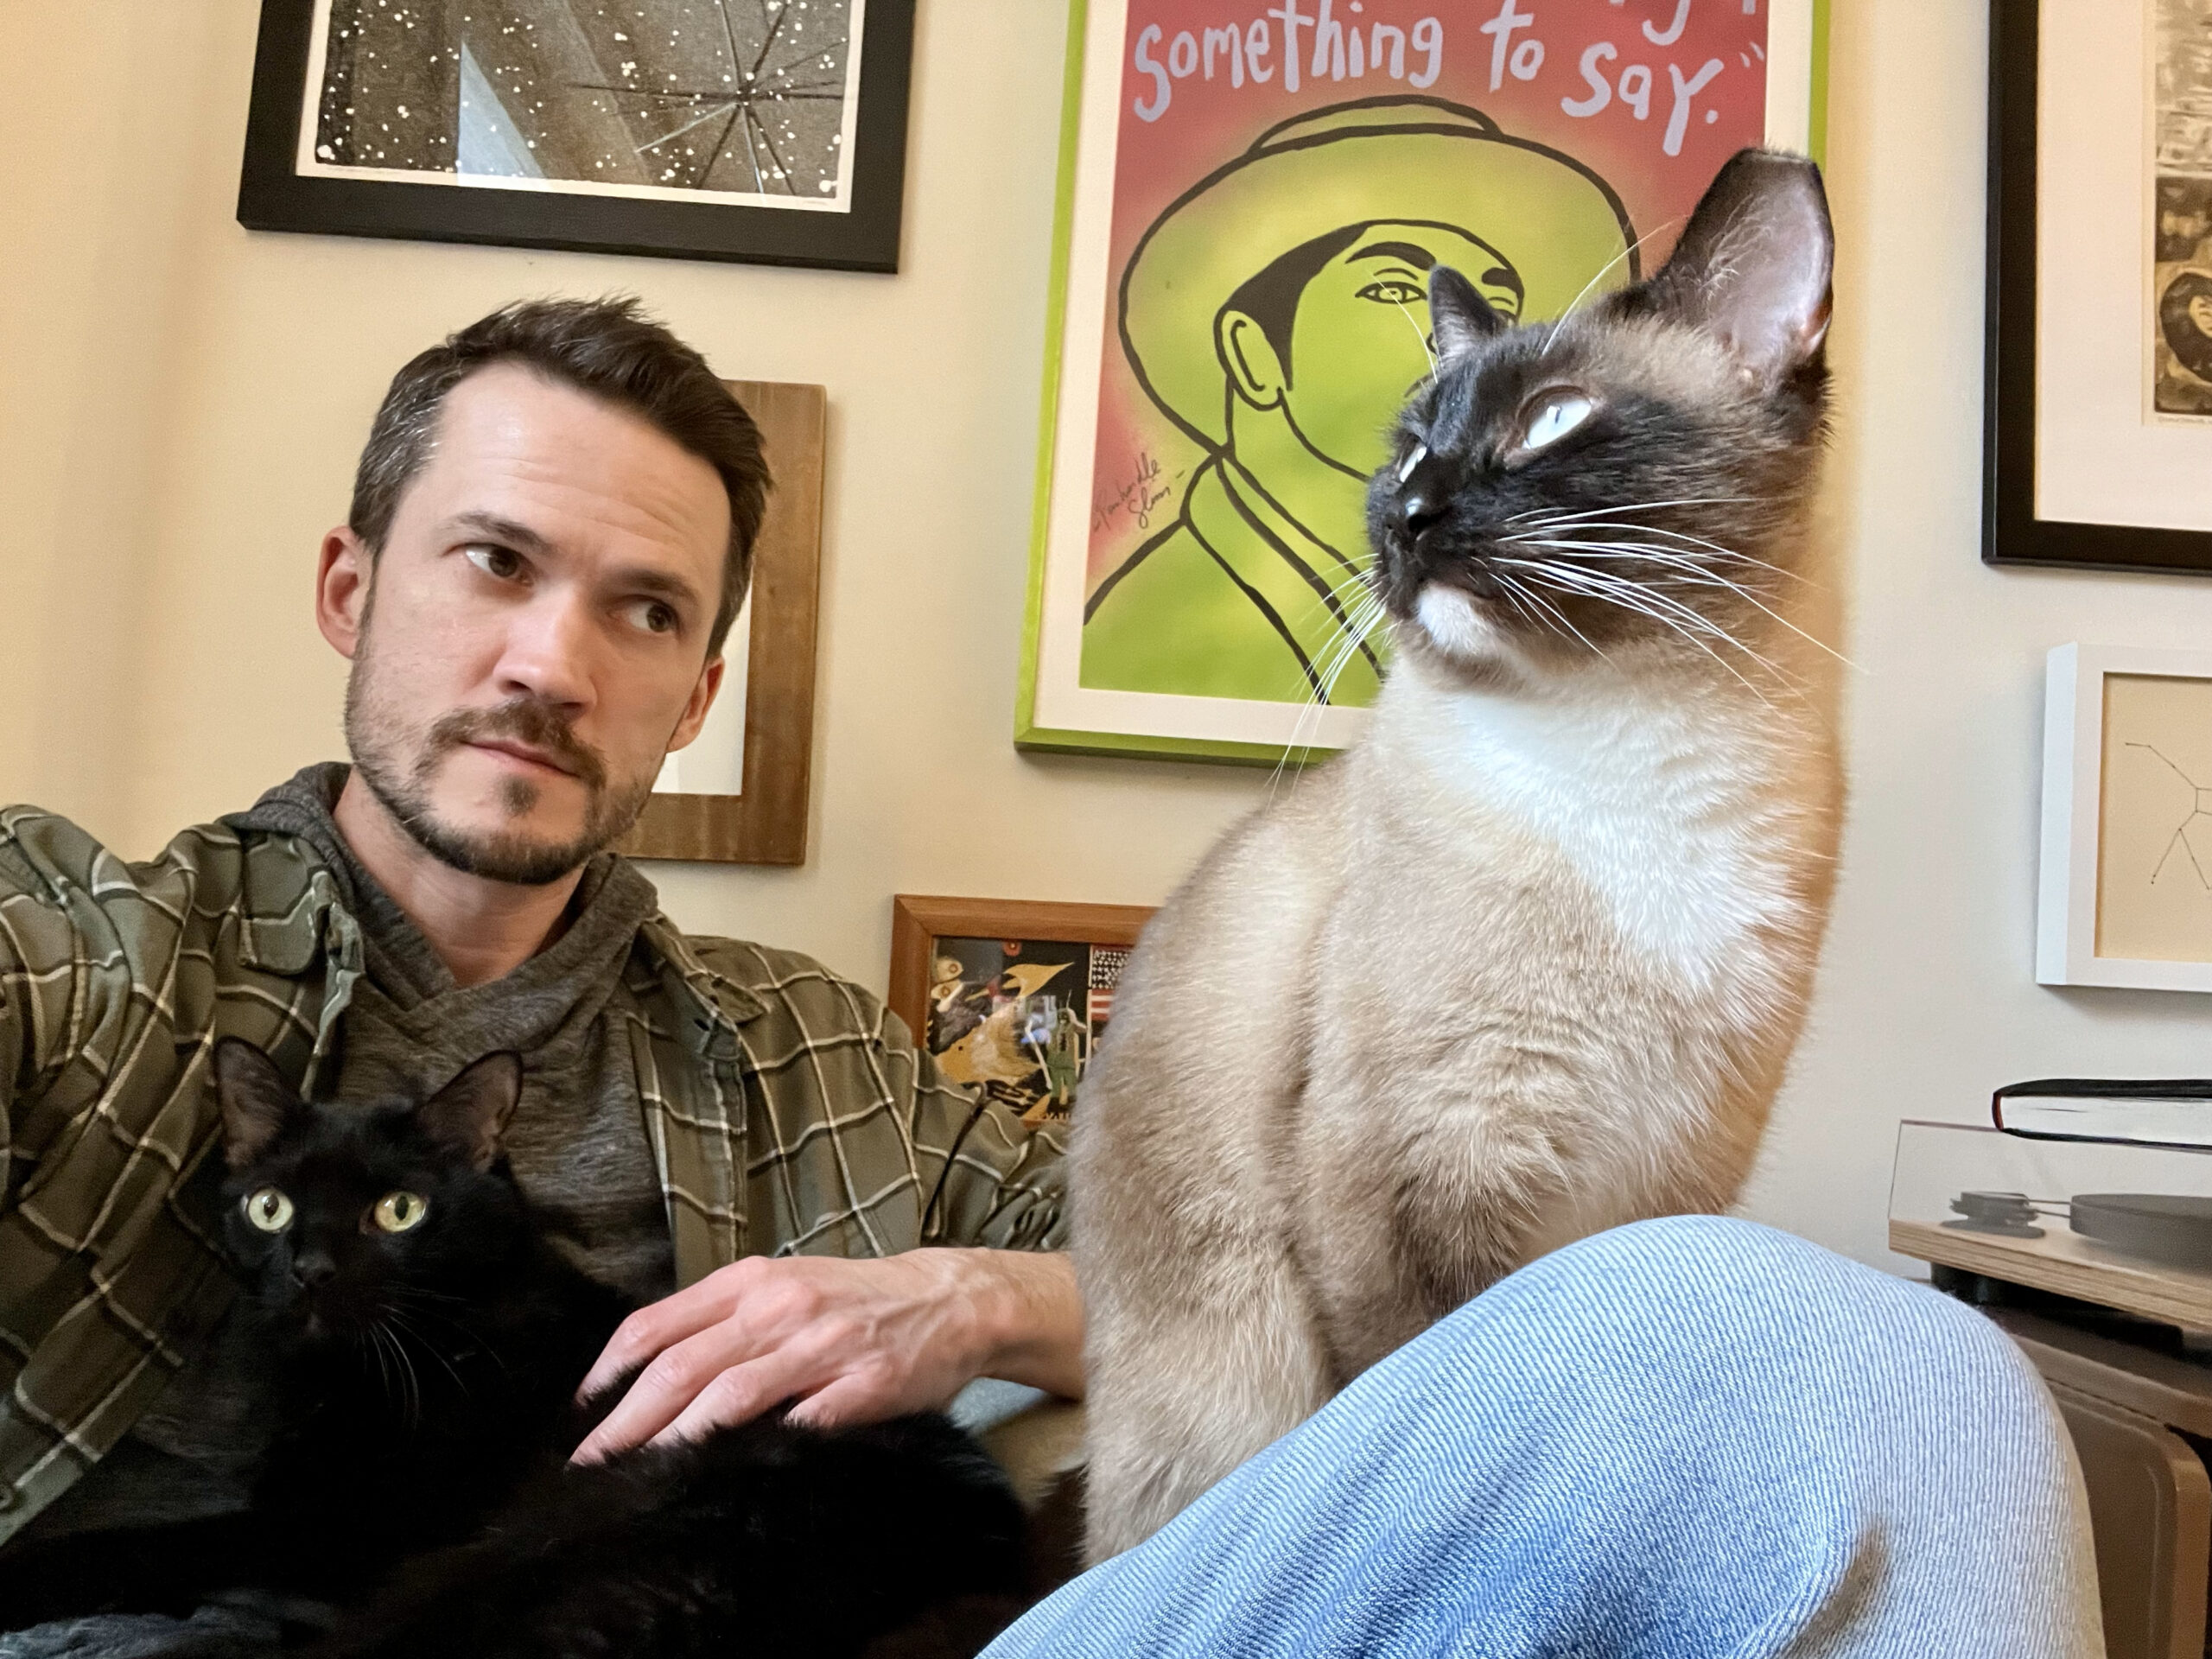 ID: Zach is a middle-aged man with brown hair and beard. He's sitting with two cats on his lap, one black, the other a siamese mix.